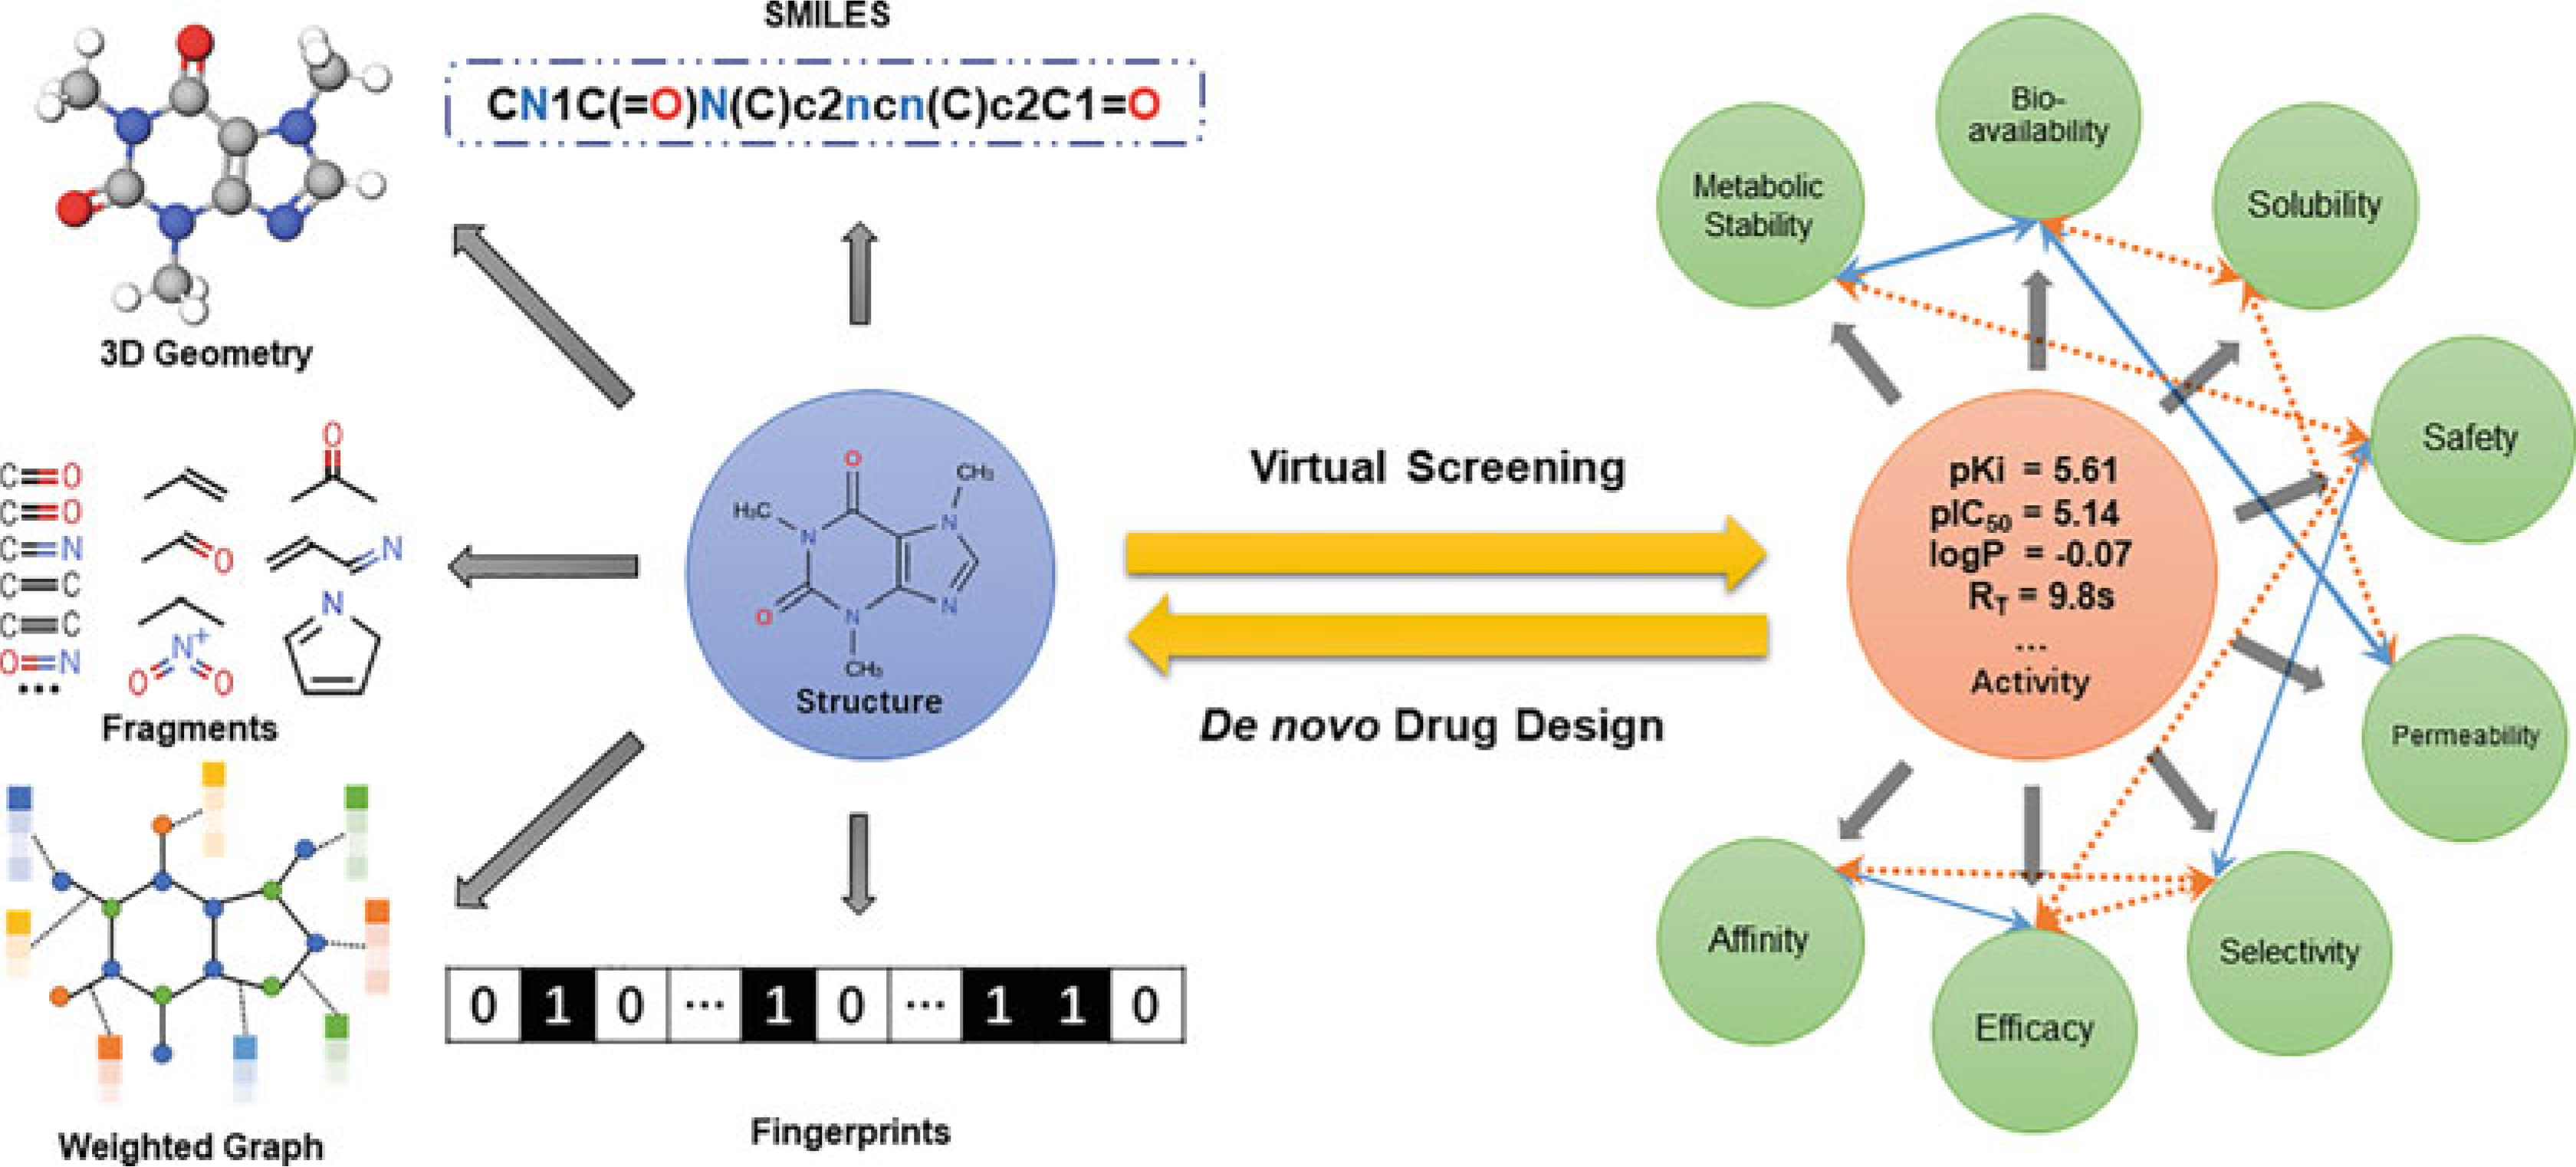 Schematic of the interplay of two approaches in computational drug discovery: virtual screening and de novo design. 